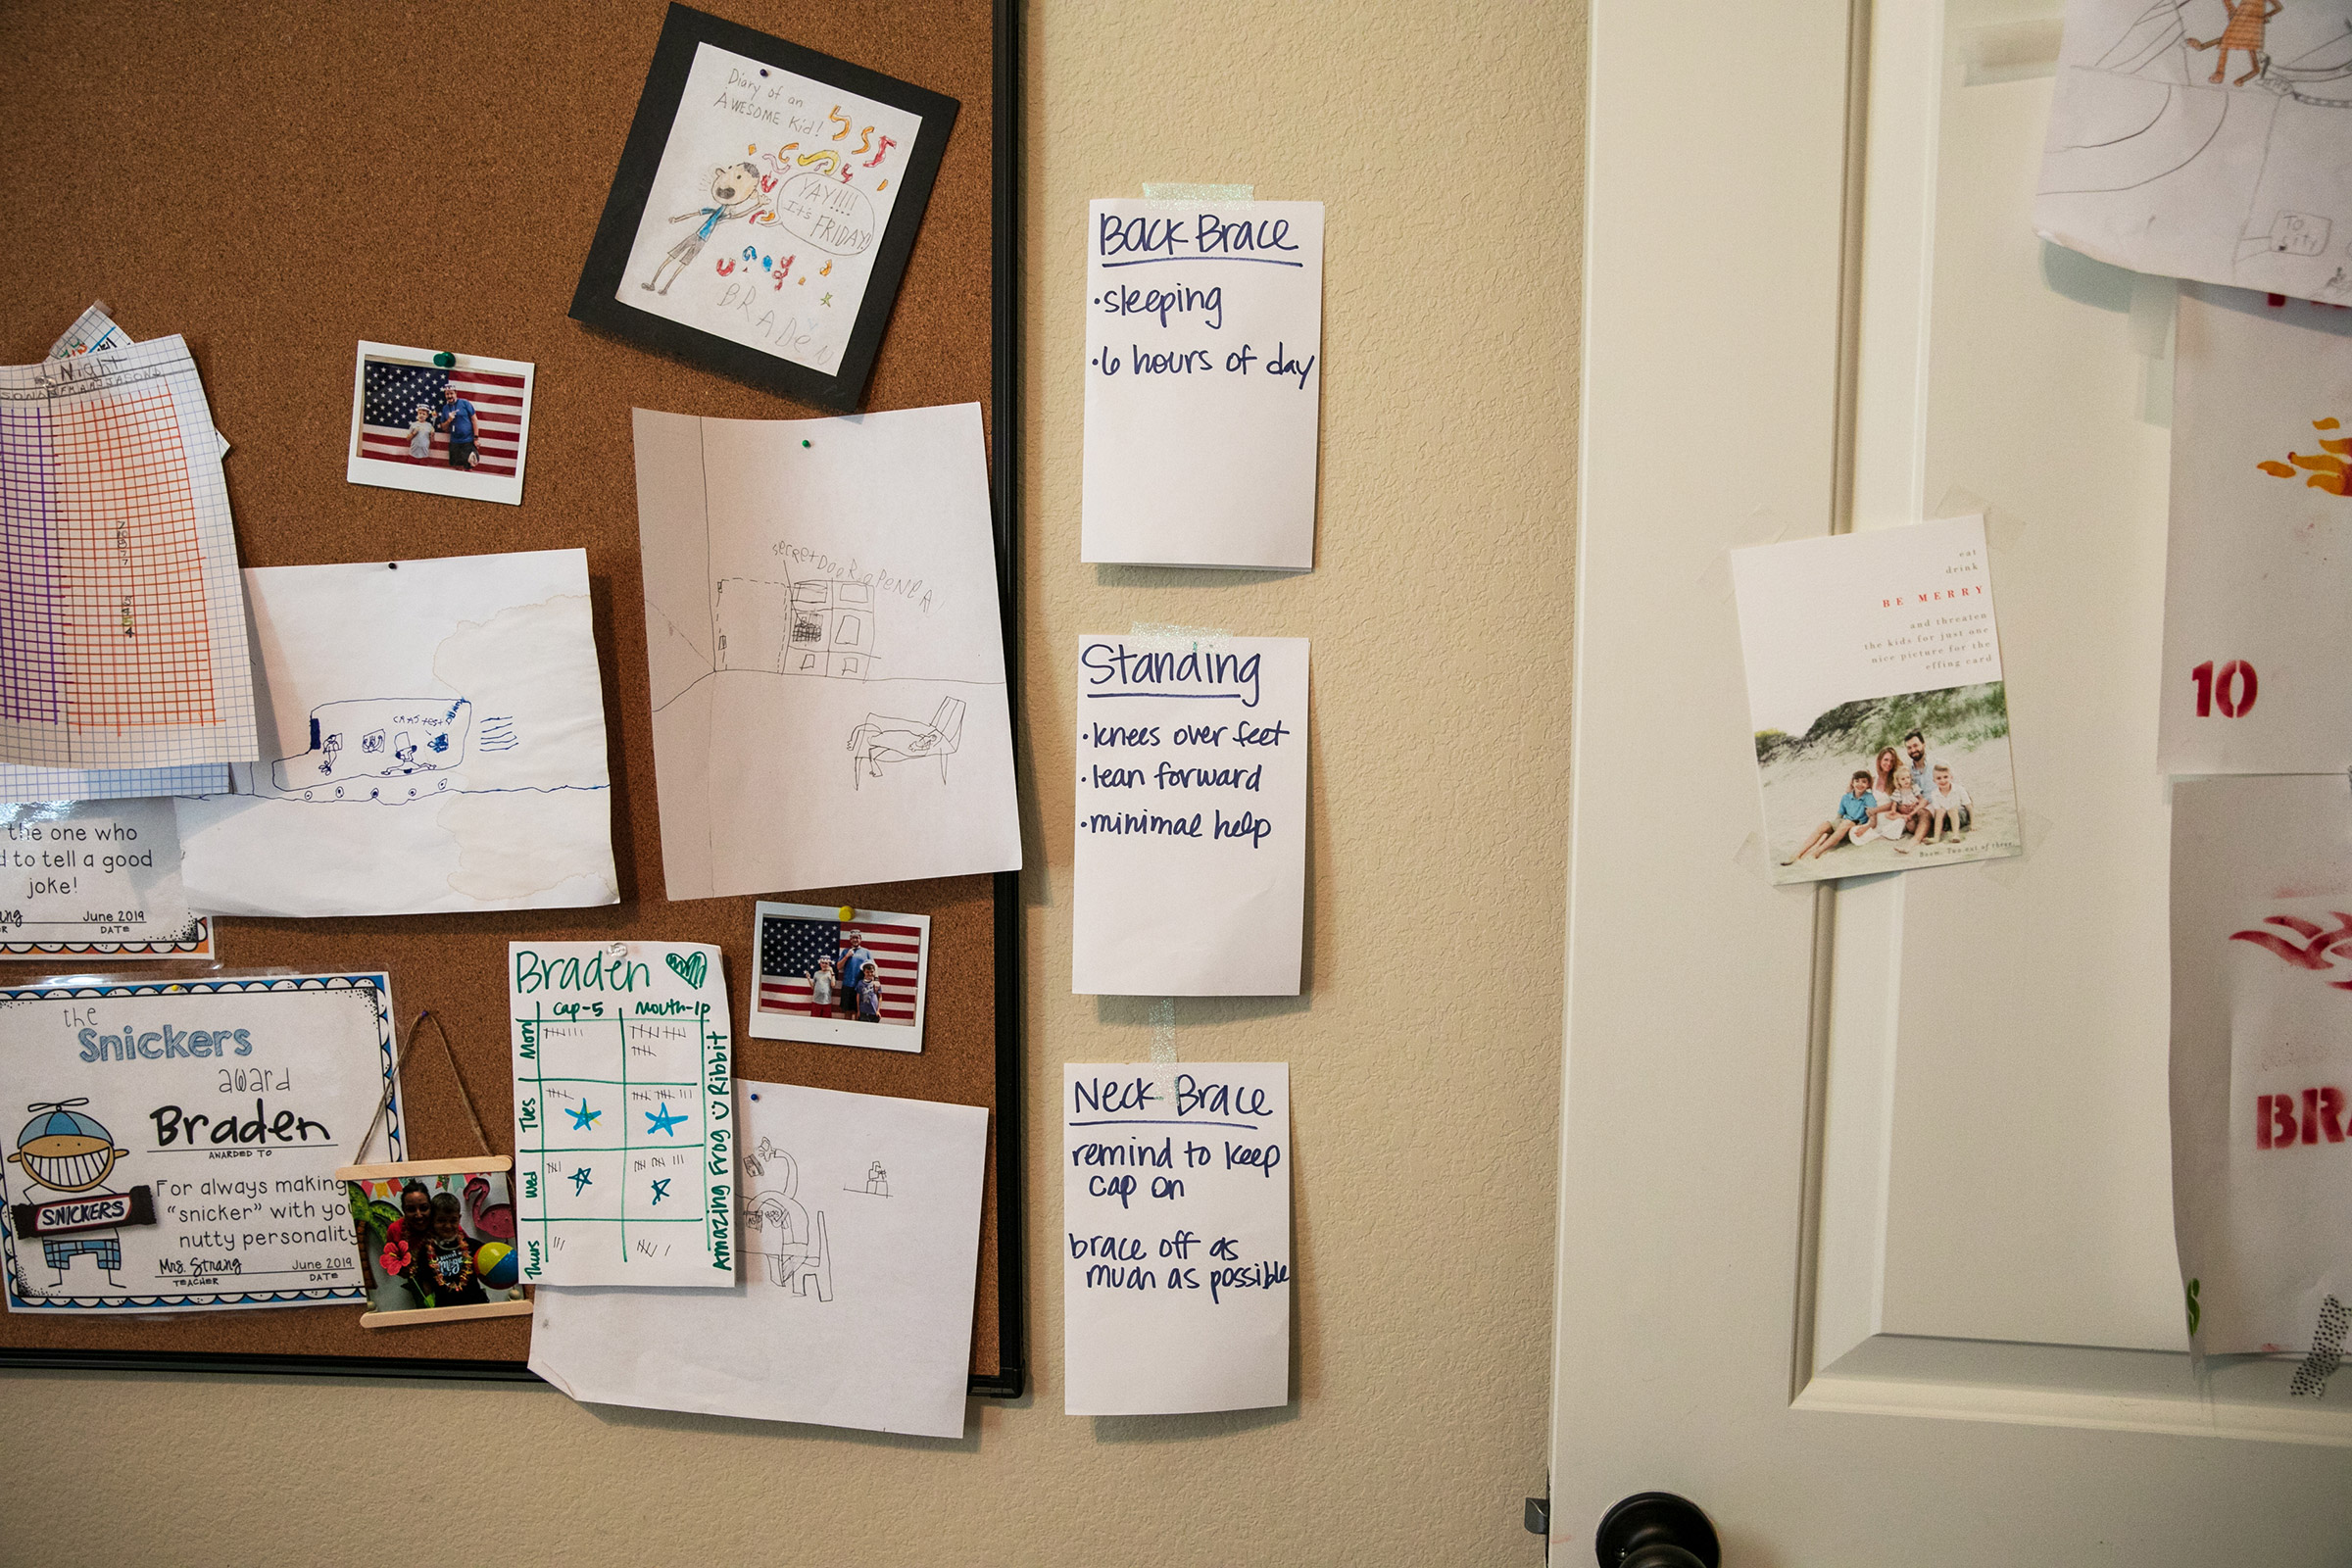 Some reminders of Braden's treatment hang on the wall in the Scott family home.